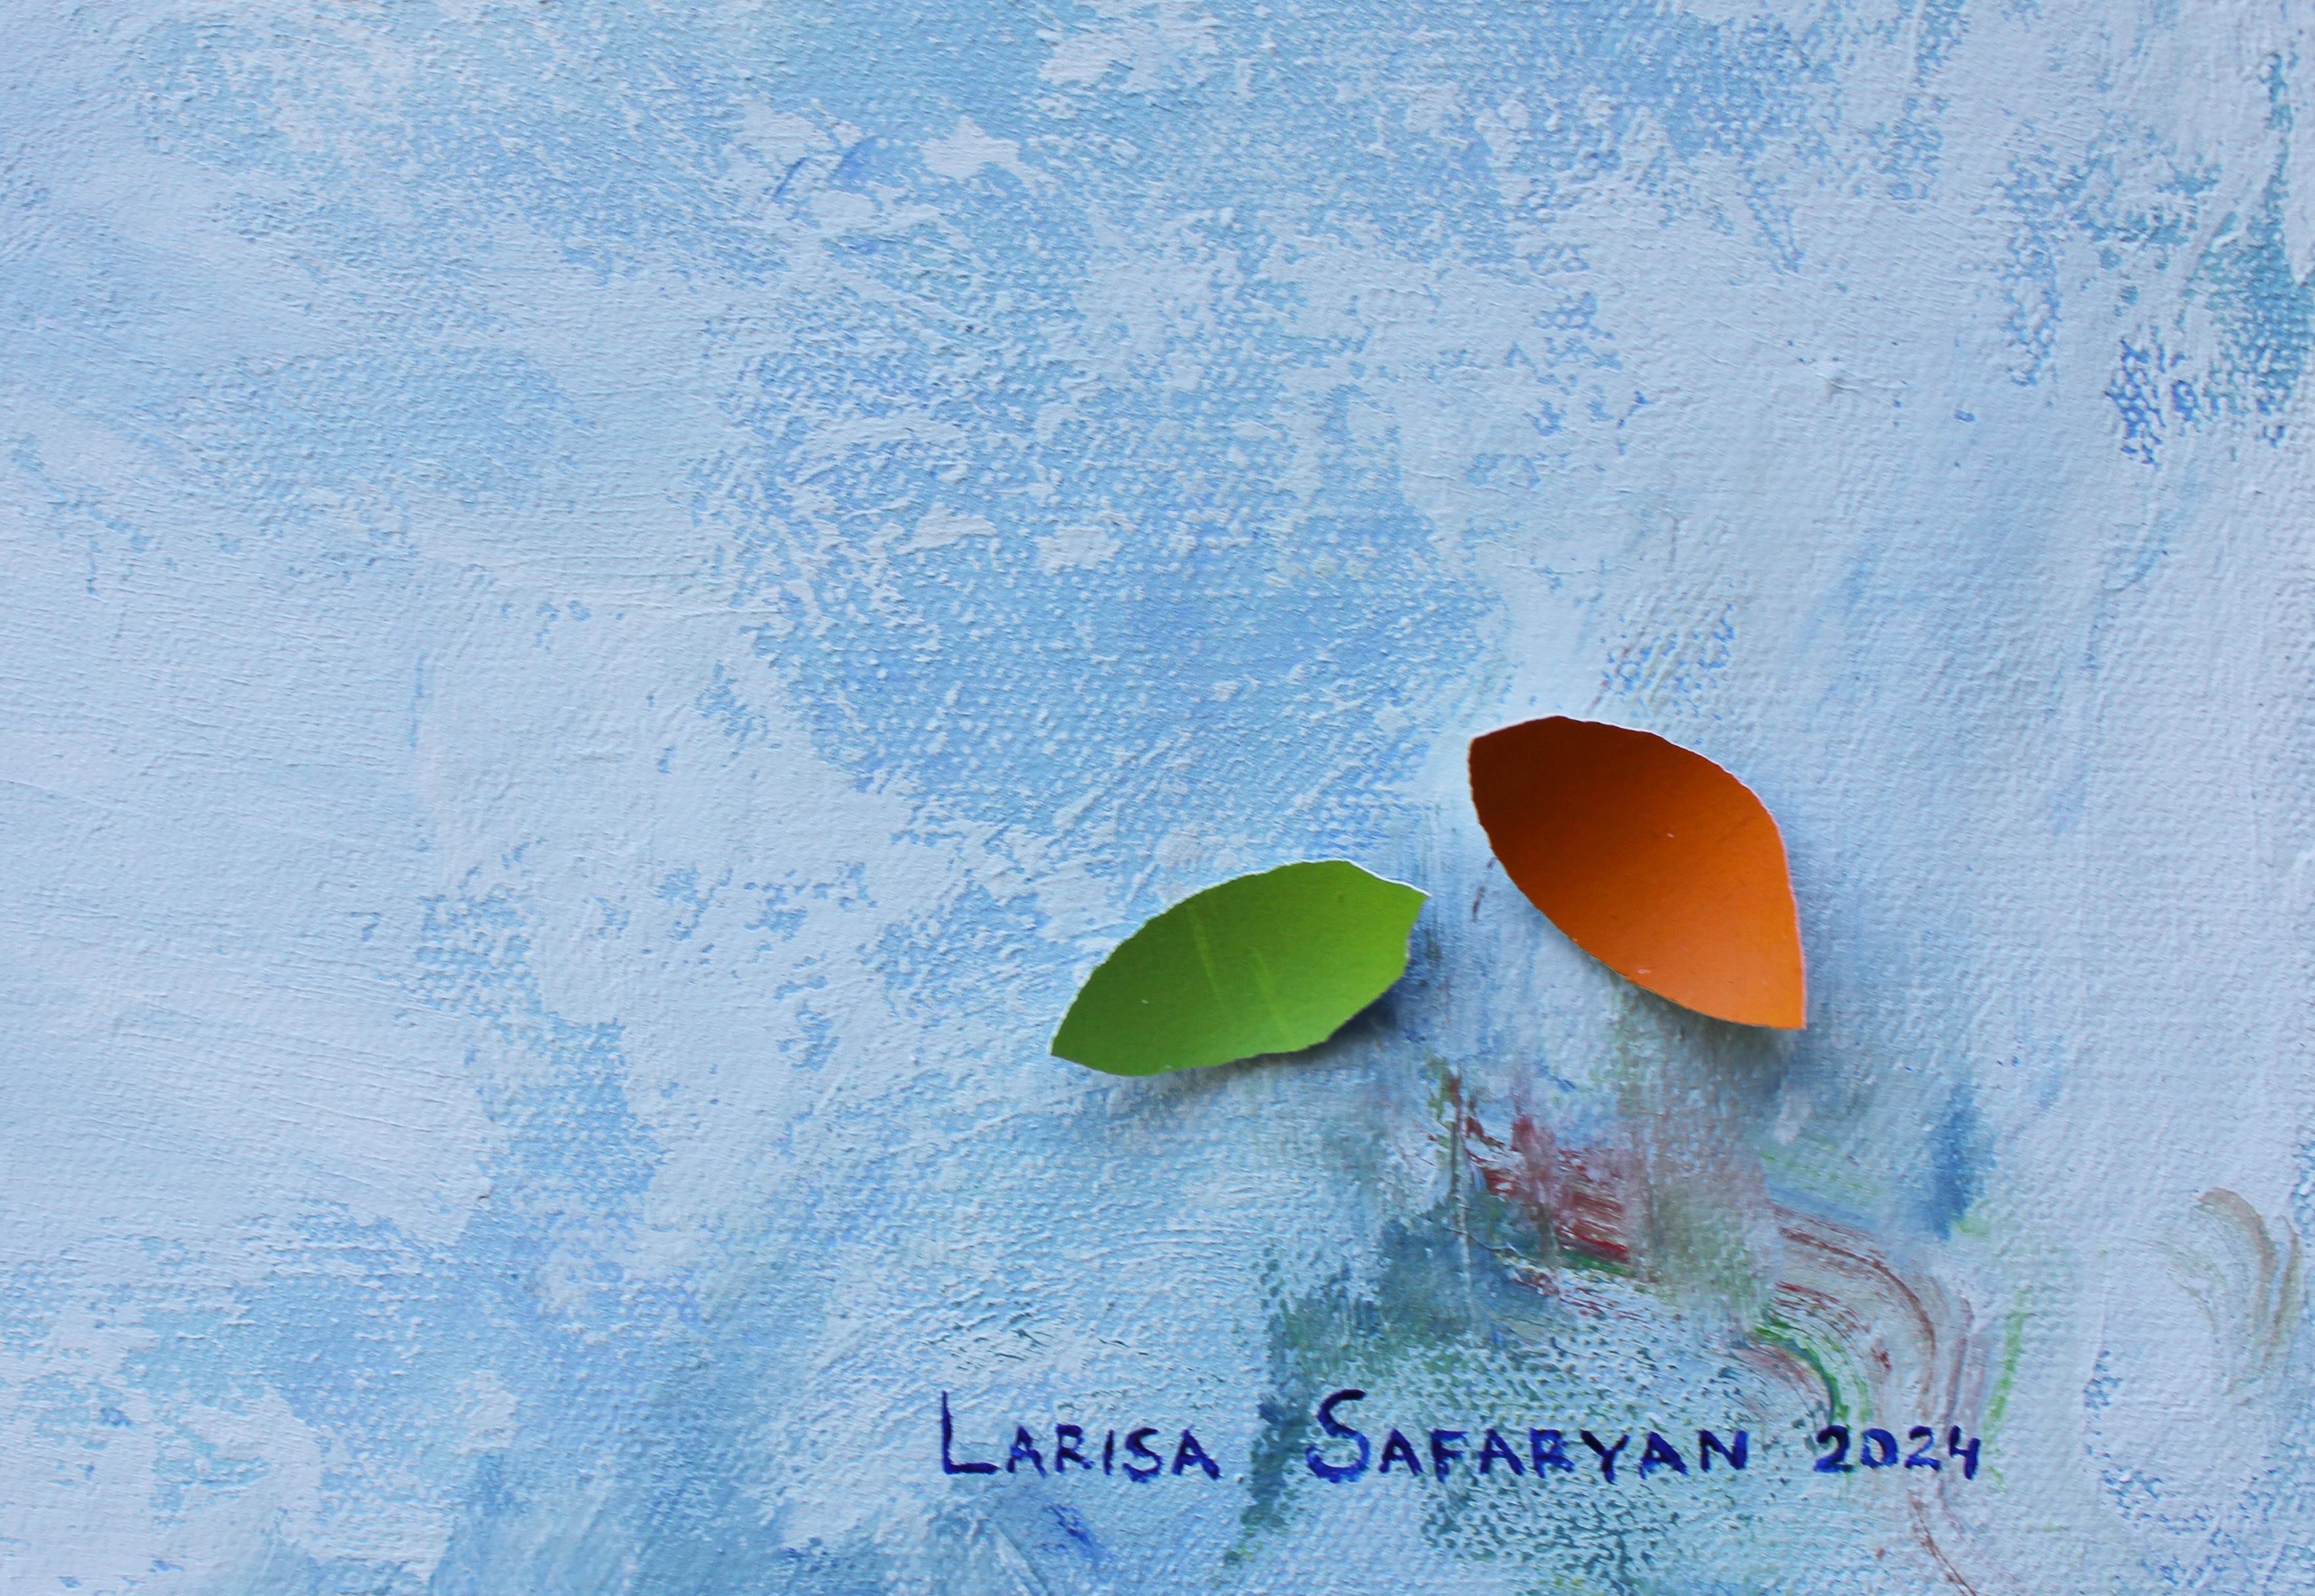 Painted Breeze by Larisa Safaryan  Acrylic paint and eggshells on canvas